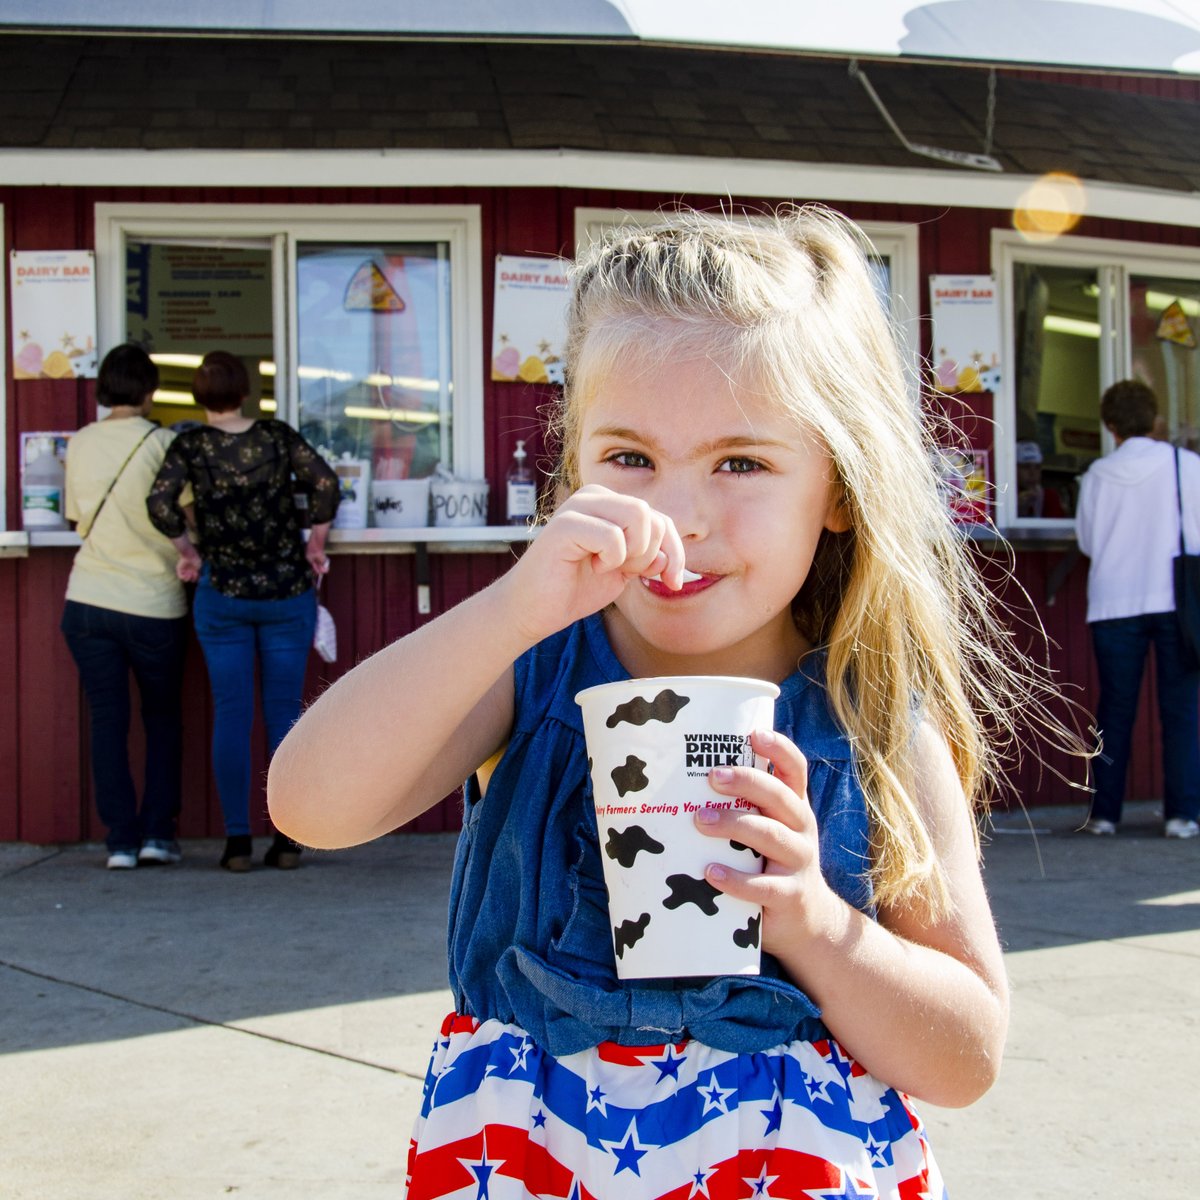 On this National Chocolate Milkshake Day we salute our beloved Dairy Bar! This year fairgoers bought more than 62,000 milkshakes from @INDairy 💪